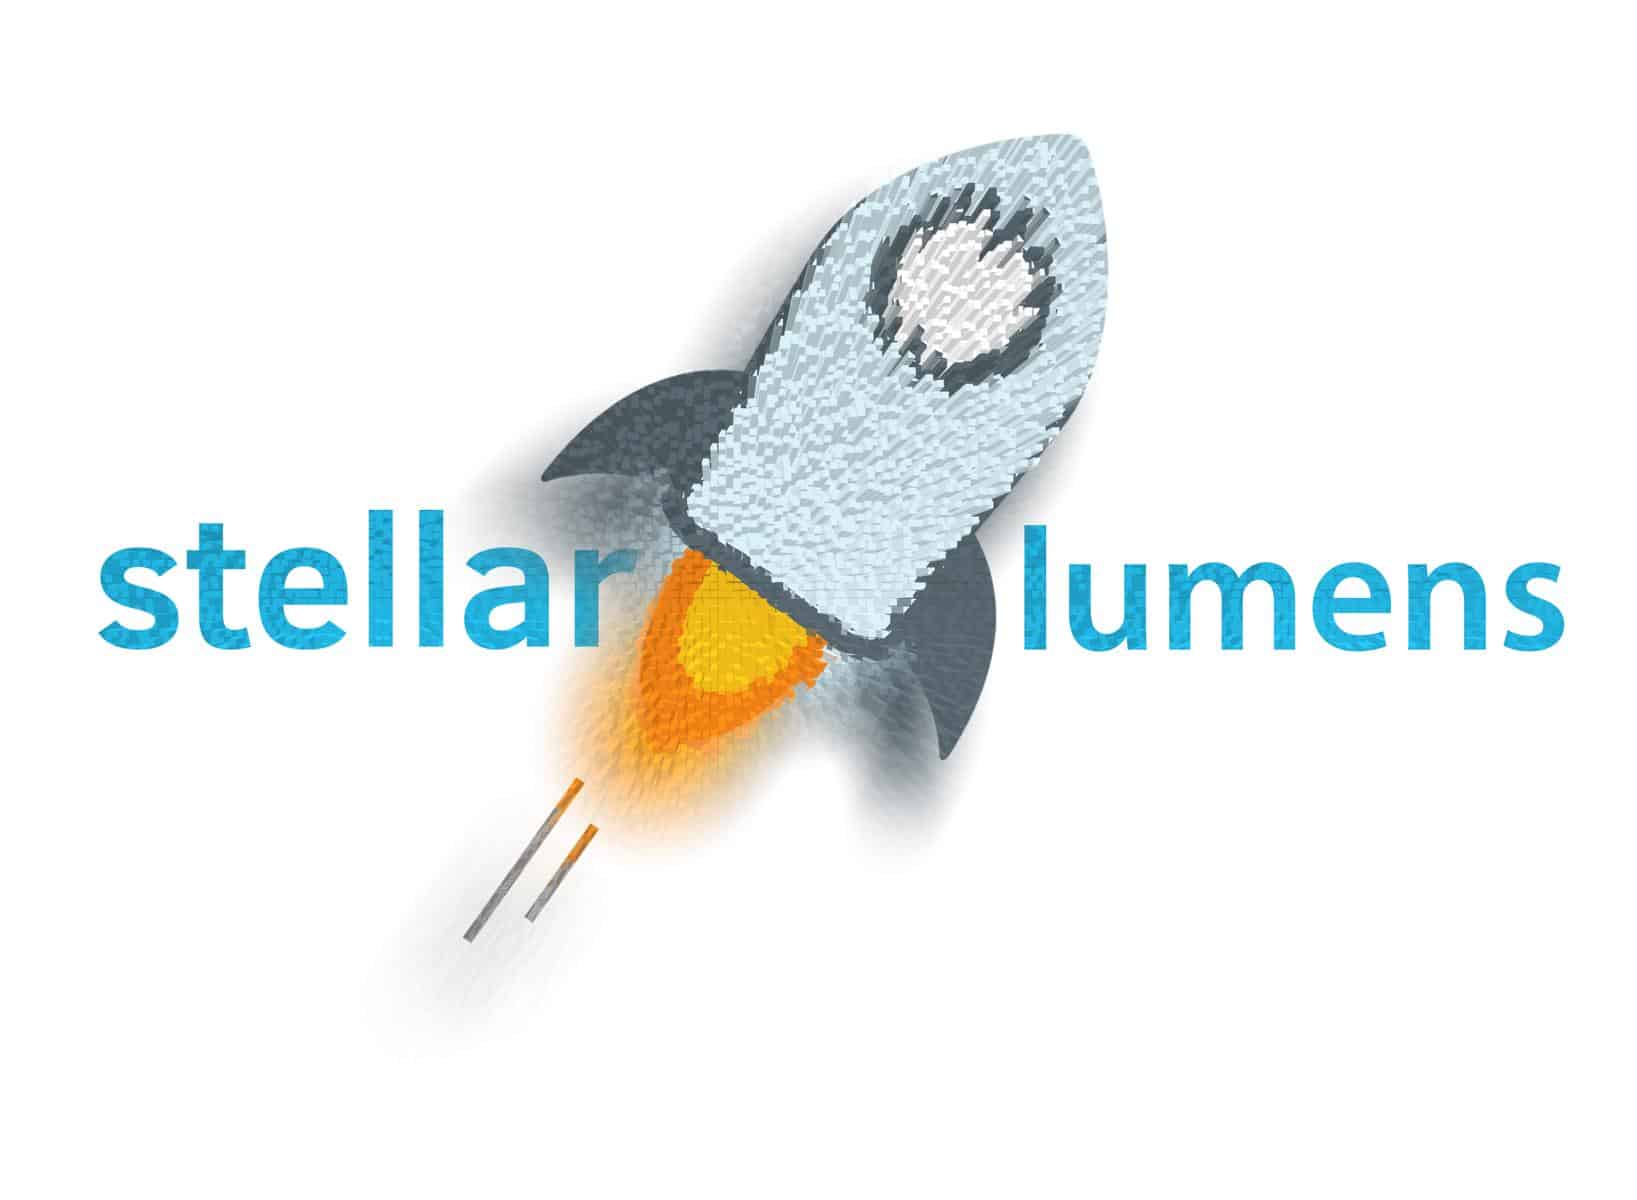 Stellar | A Blockchain Network for Payments and Tokenization